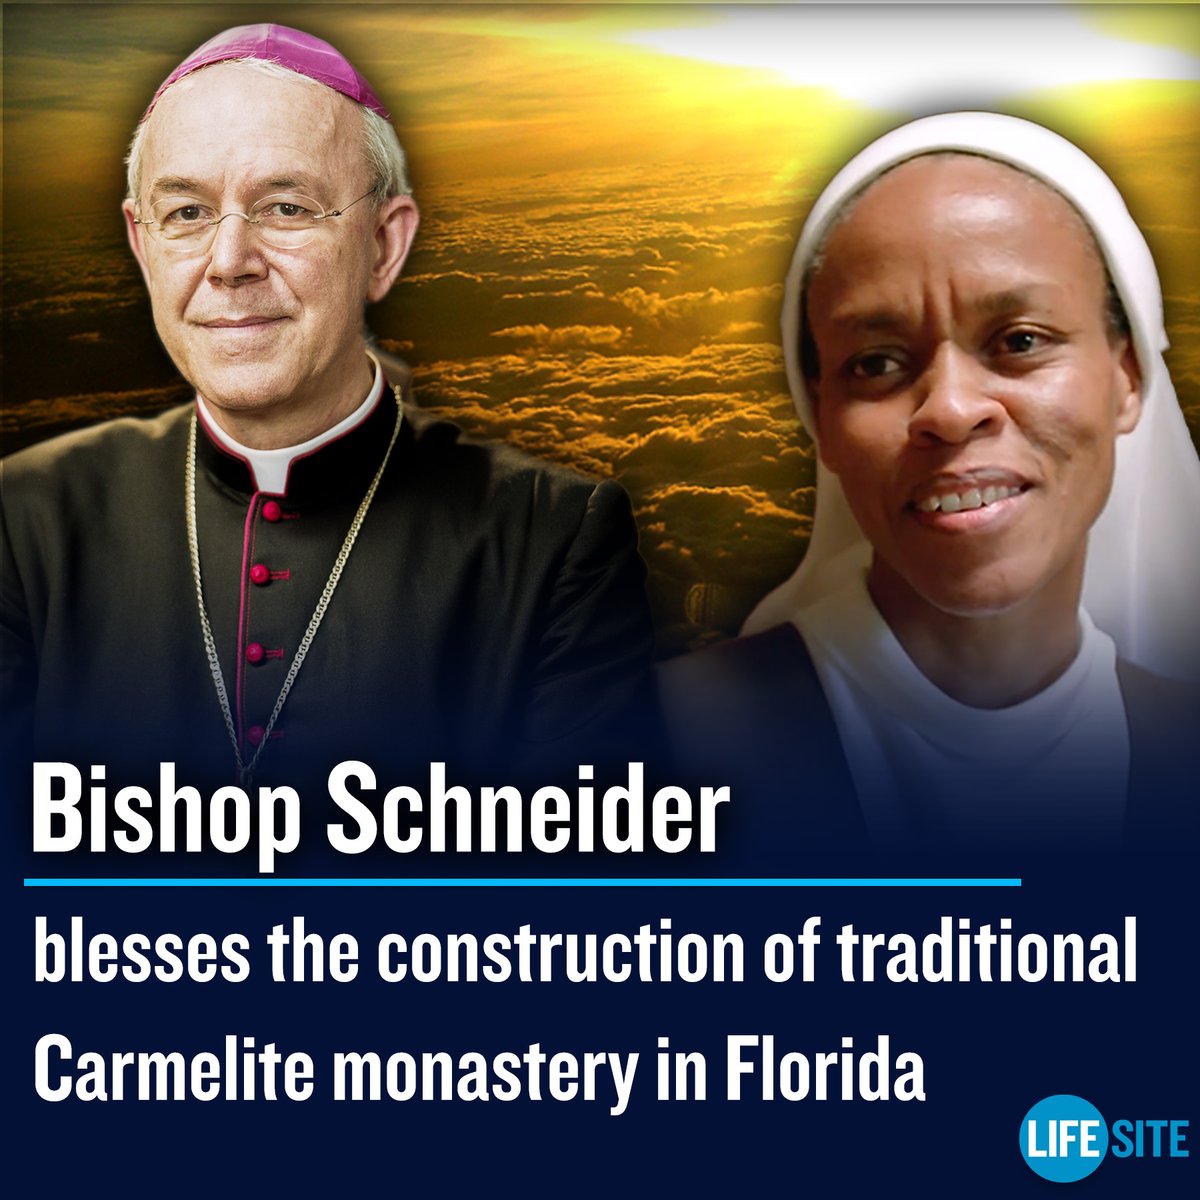 Bishop Athanasius Schneider of Astana, Kazakhstan, blessed ongoing efforts to establish a traditional Carmelite monastery in Florida, independent of any diocese. MORE: lifesitenews.com/news/bishop-sc… #CatholicX #Catholics #Florida #Faith #news